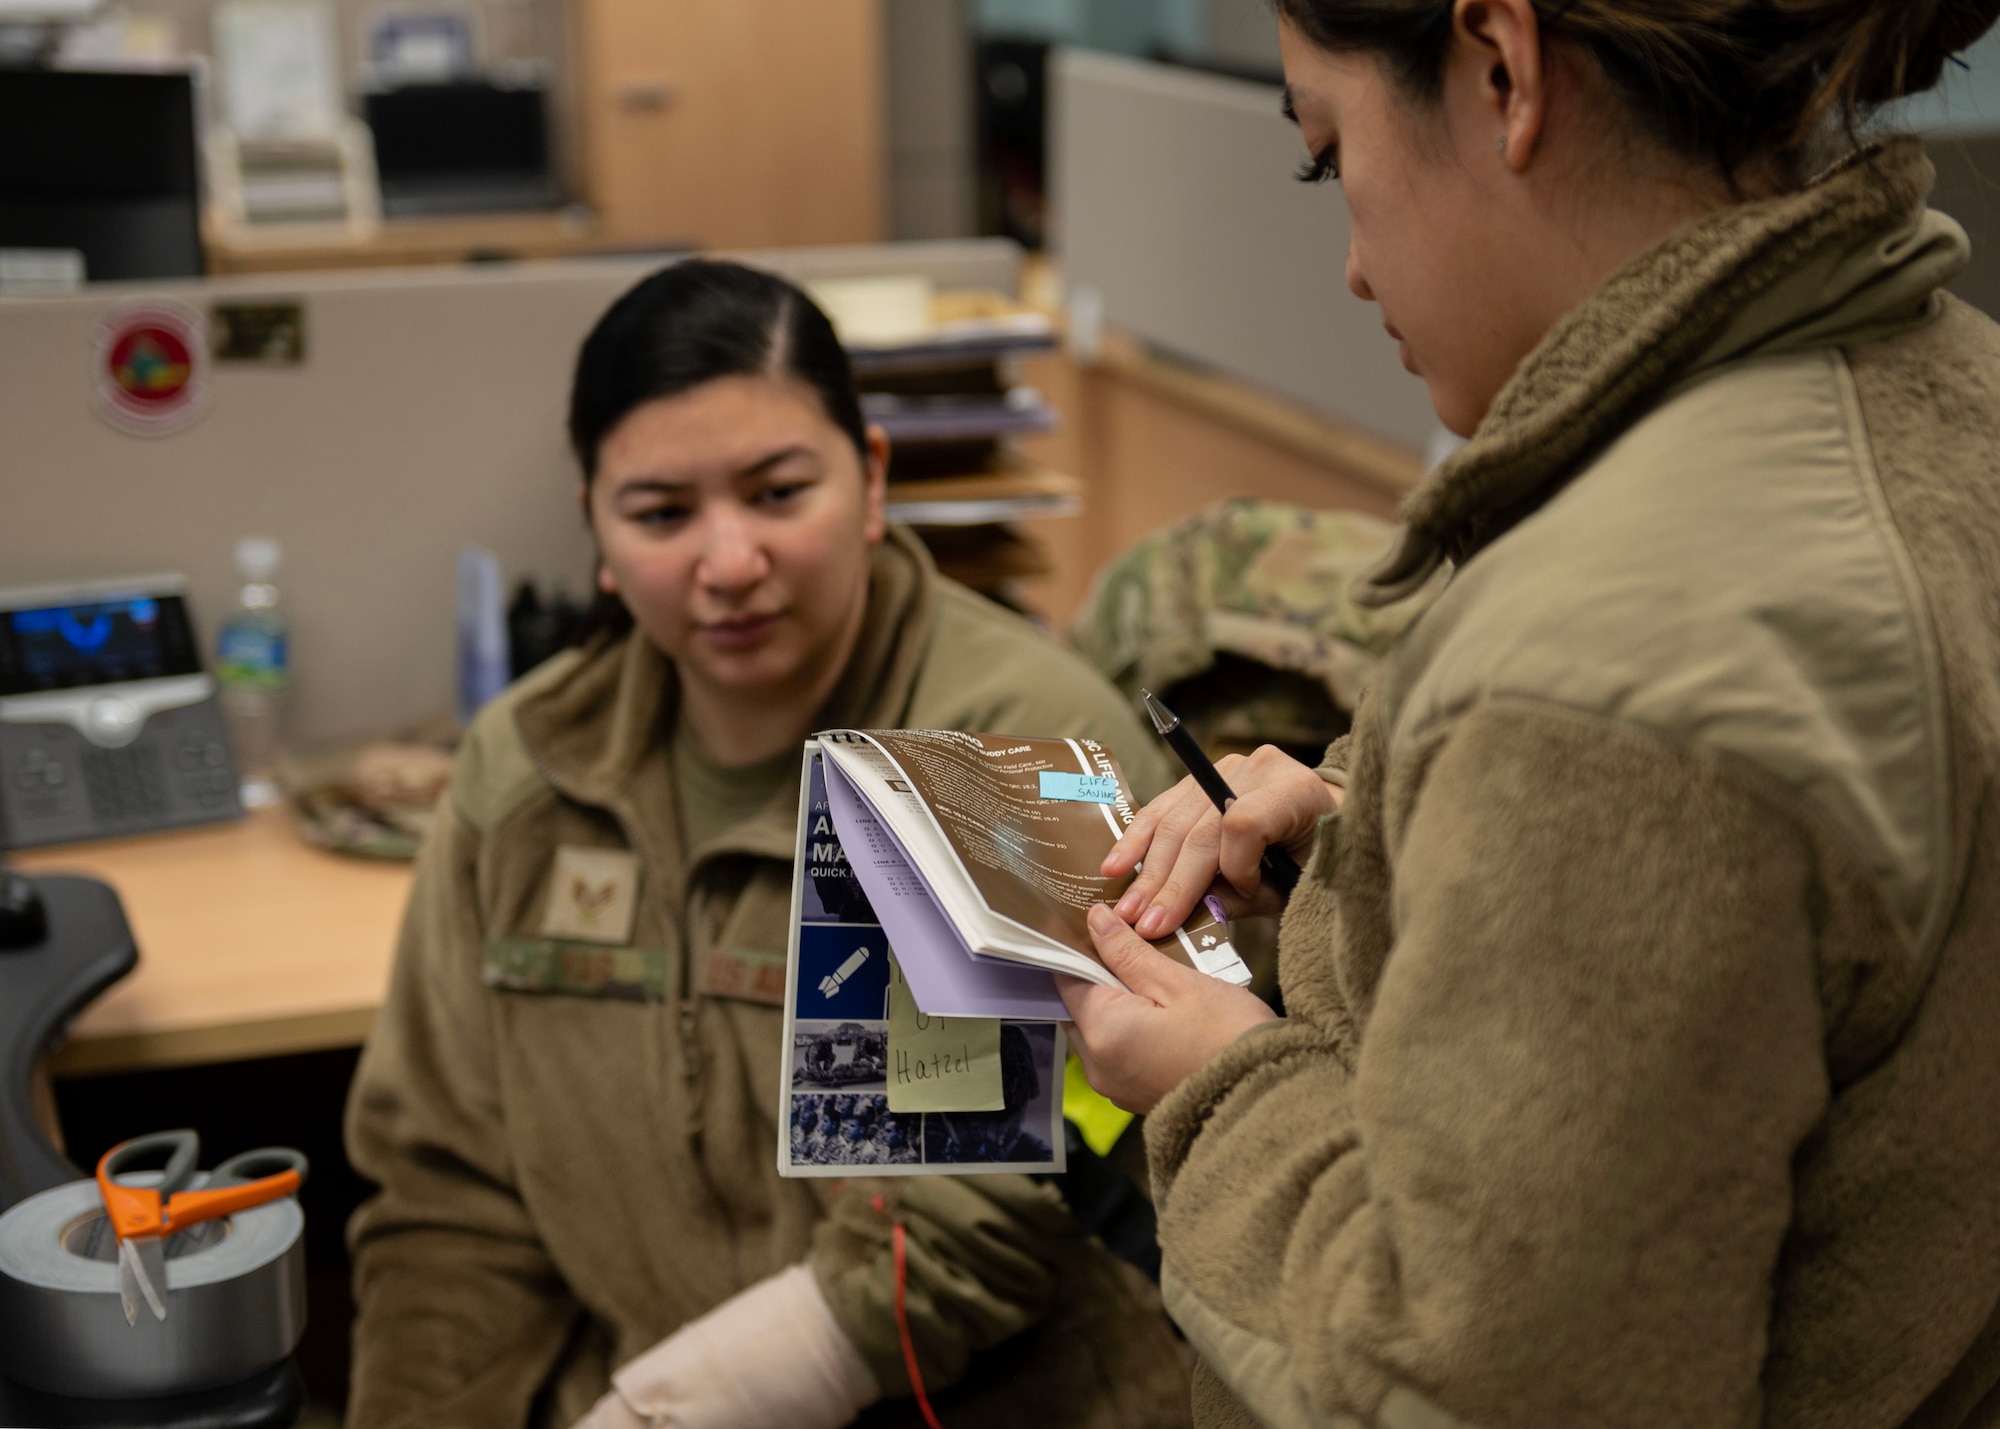 U.S. Air Force Staff Sgt. Riciel Sobreo, 51st Comptroller Squadron resource advisor, right, confirms all steps were completed with an Airman’s Manual after conducting tactical combat casualty care on a patient, Staff Sgt. Angelica Yap, 51st CPTS financial operations supervisor, during Beverly Midnight 24 at Osan Air Base, Republic of Korea, Jan. 29, 2024. The Airman's Manual provides individual Airmen with the basic tactics, techniques, and procedures necessary to support Air Force warfighting roles while forging a warrior ethos and mindset. As the most forward deployed permanently based wing in the Air Force, the 51st Fighter Wing is charged with providing mission-ready Airmen to execute combat operations and receive follow-on forces. (U.S. Air Force photo by Staff Sgt. Aubree Owens)